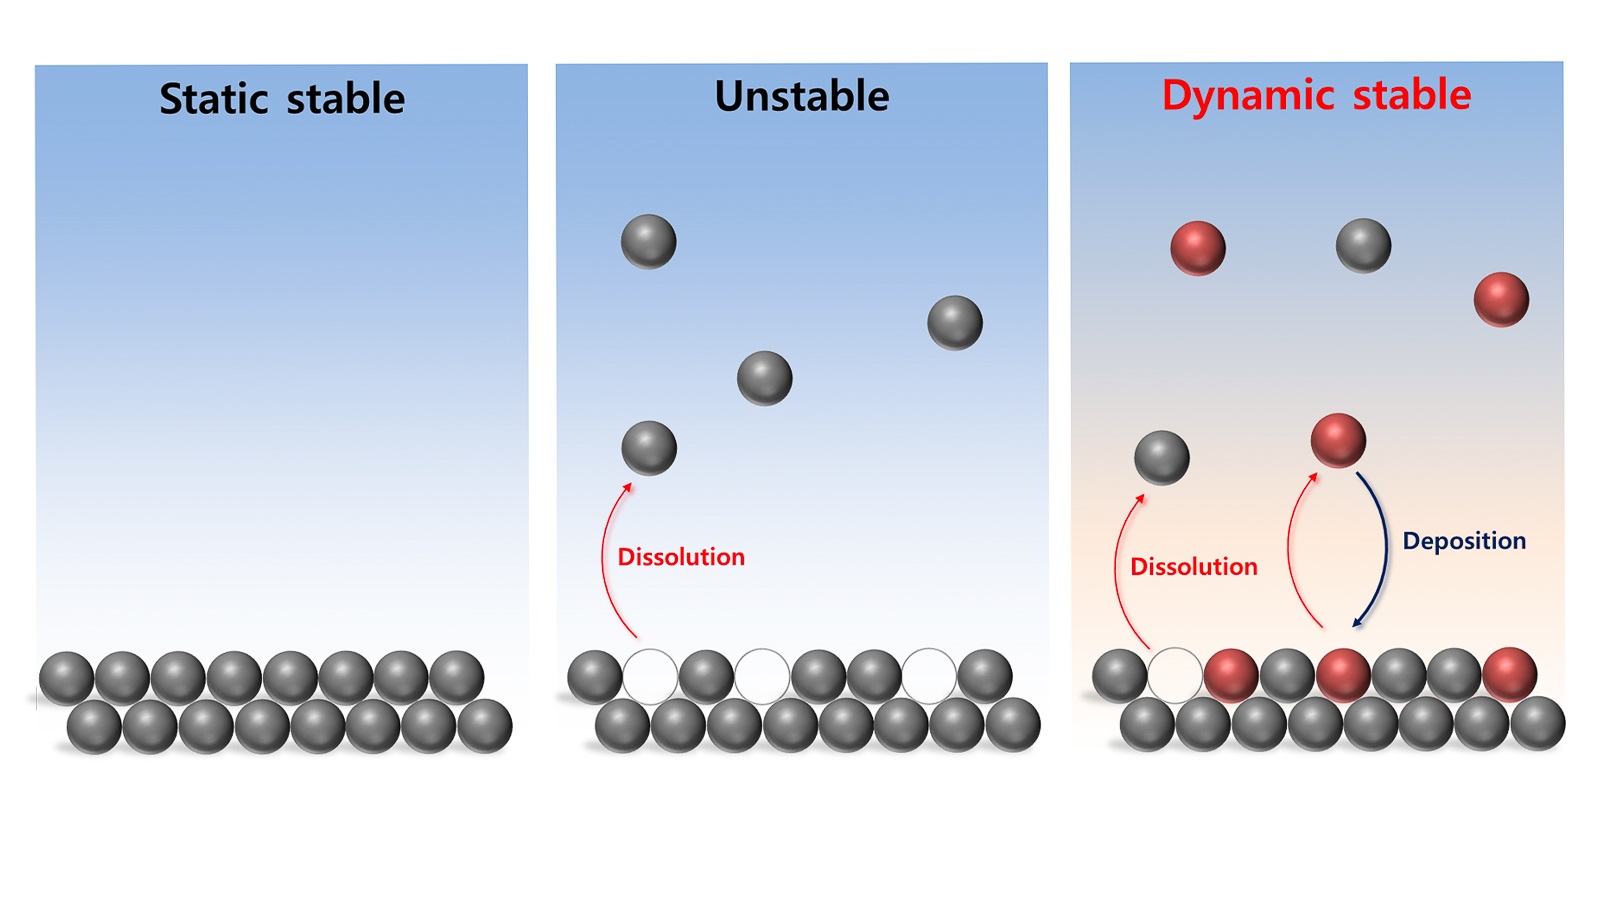 Schematic illustration of three types of stability —  static stability, instability and dynamic stability. The dynamically stable condition balances iron dissolution and deposition at the electrochemical interface. (Image by Dongyoung Jung, Argonne National Laboratory.)